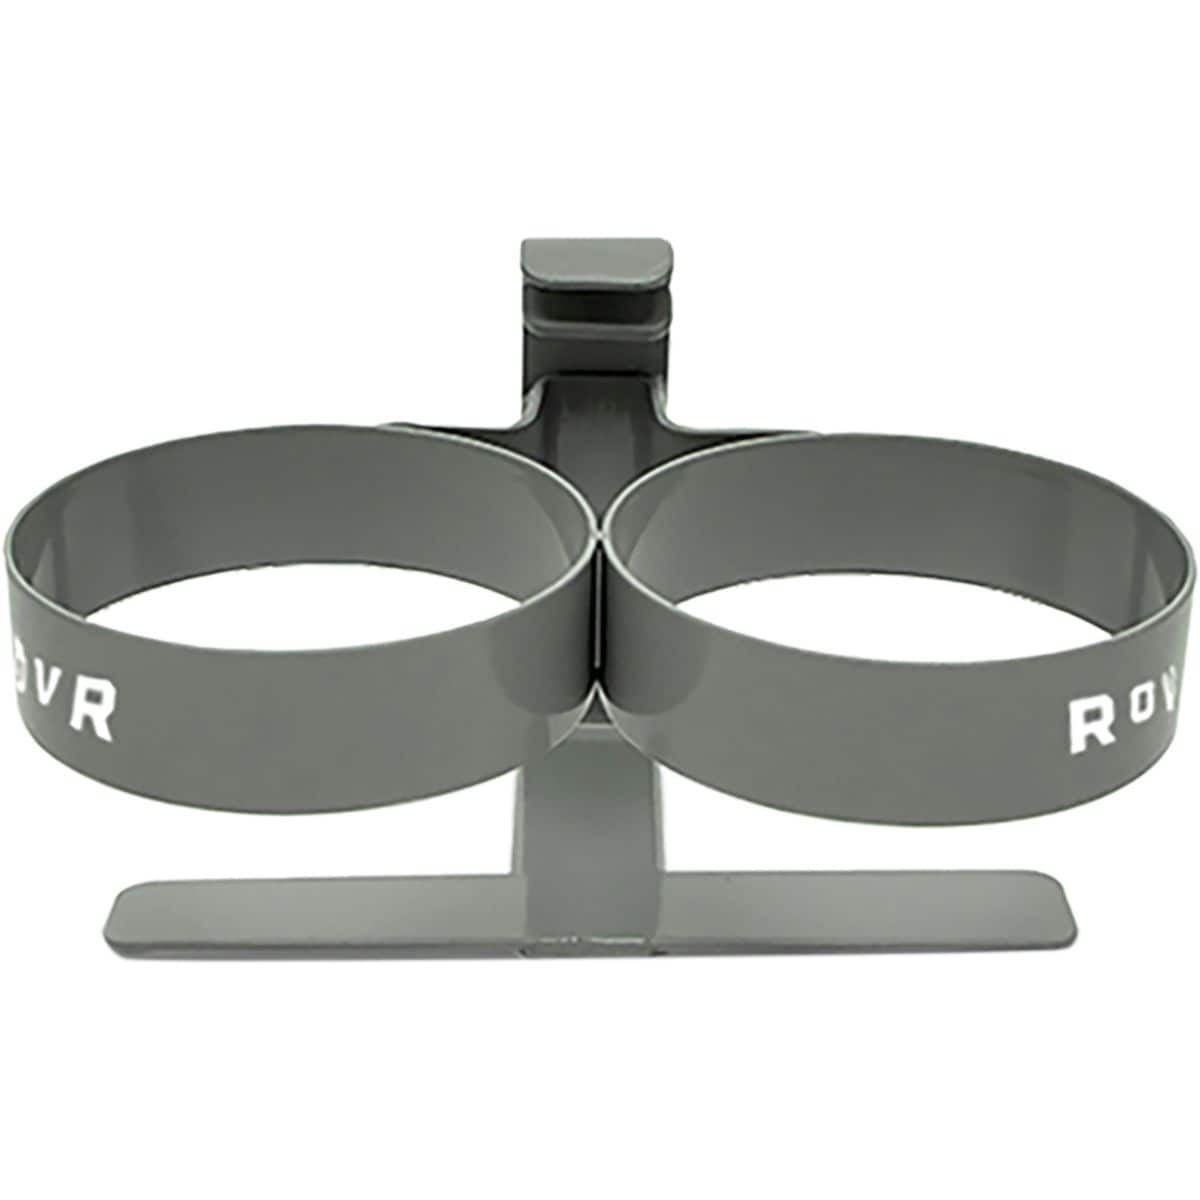 RovR Double Cup Holder